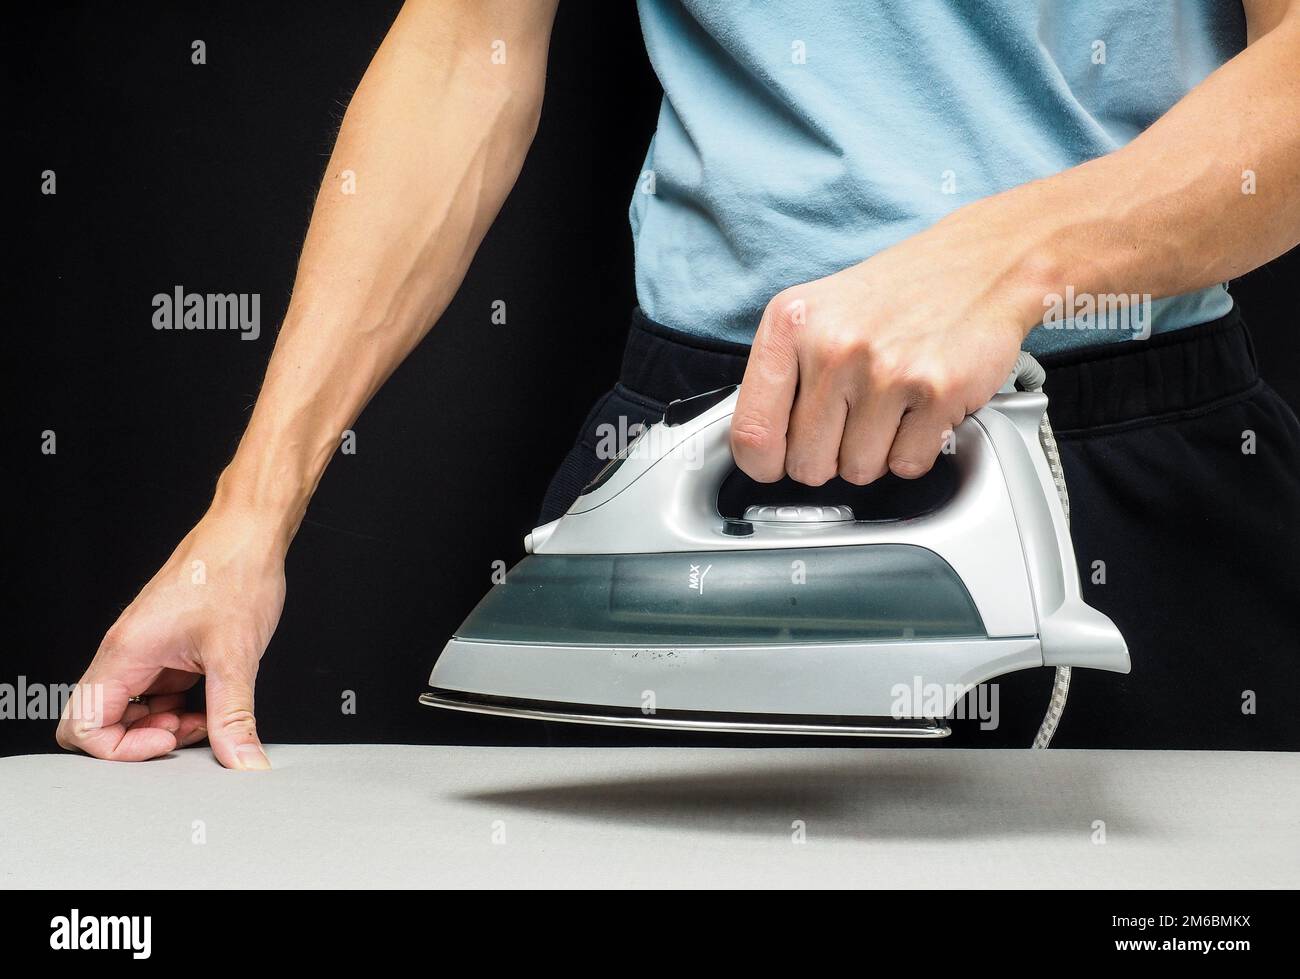 Male person using a steaming hot iron, on a iron board on black Stock Photo